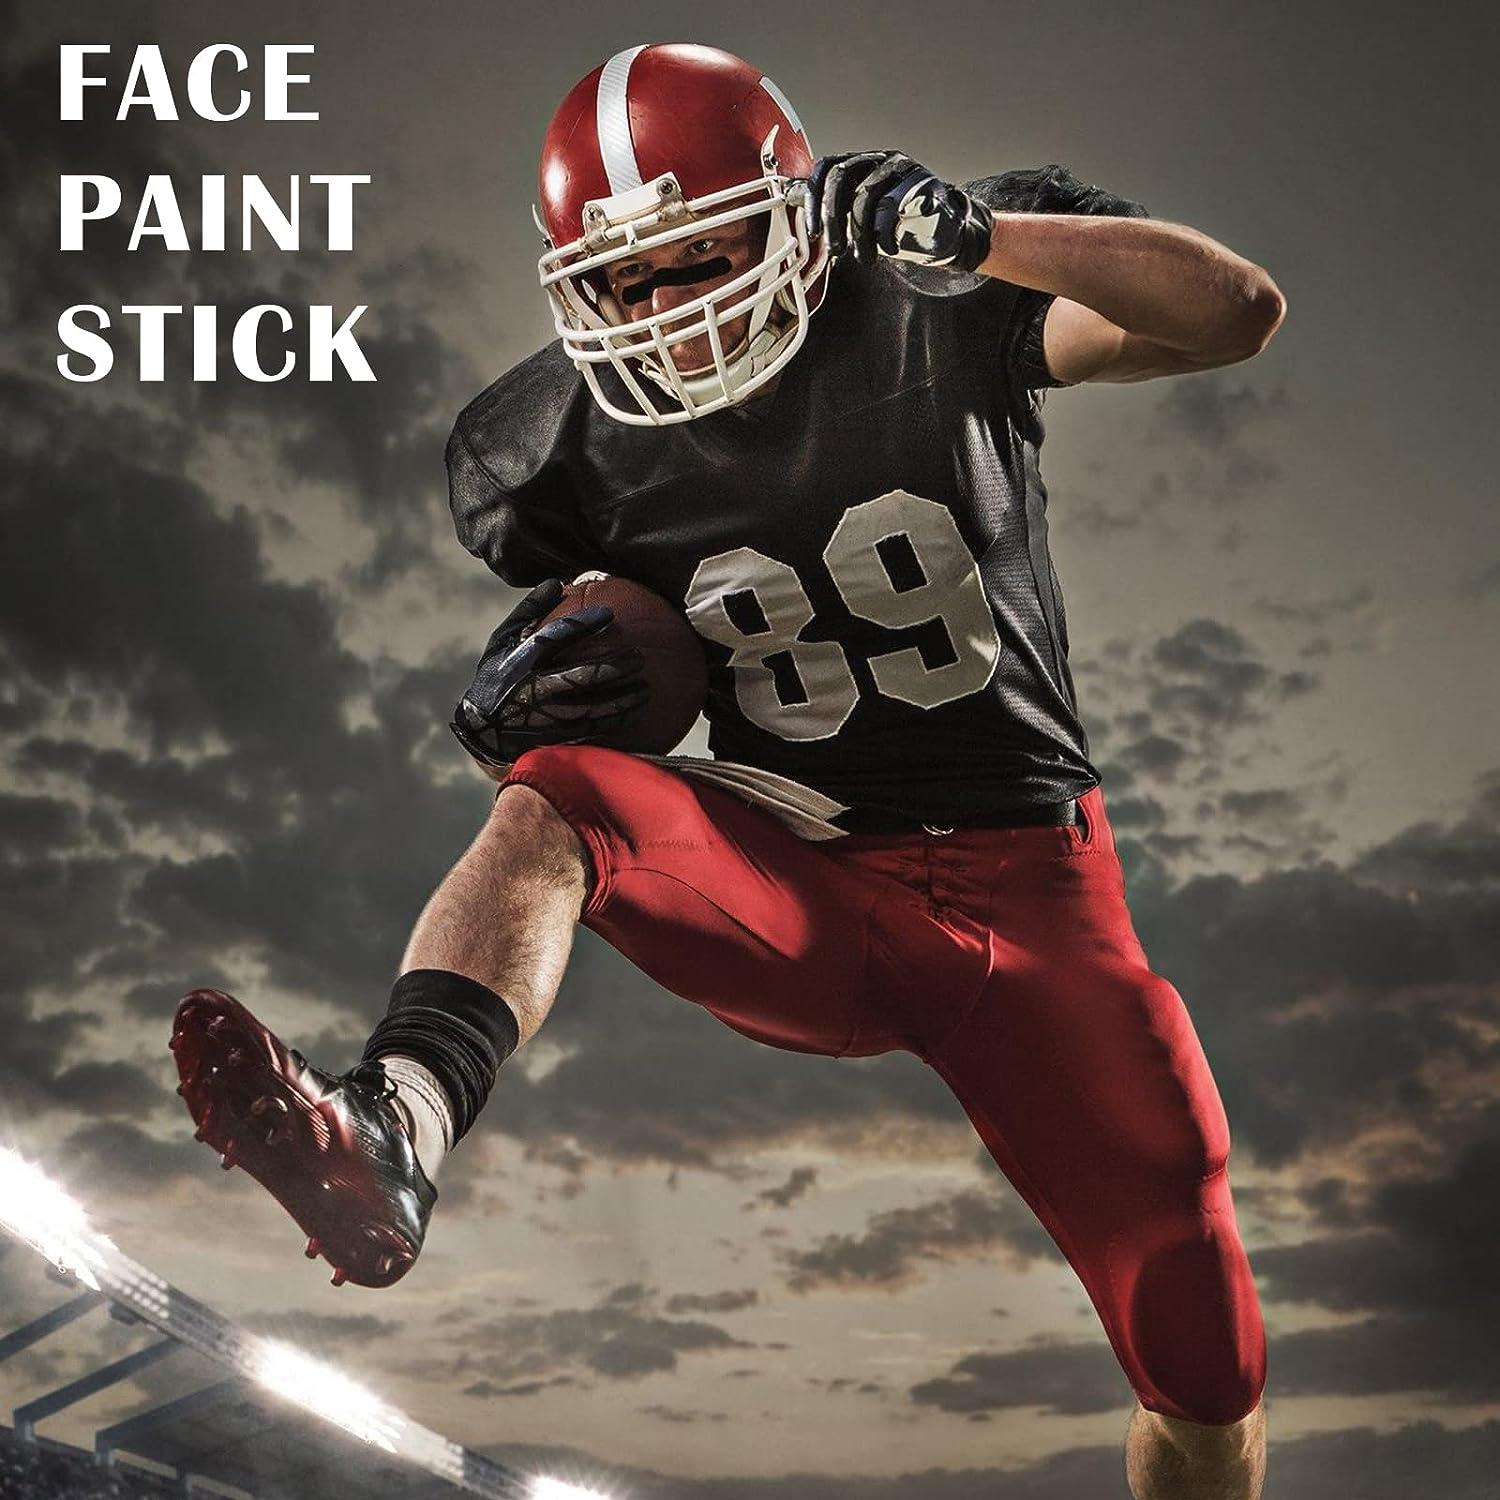 Eye Black Stick for Sports,Football Black Stick Easy to Color